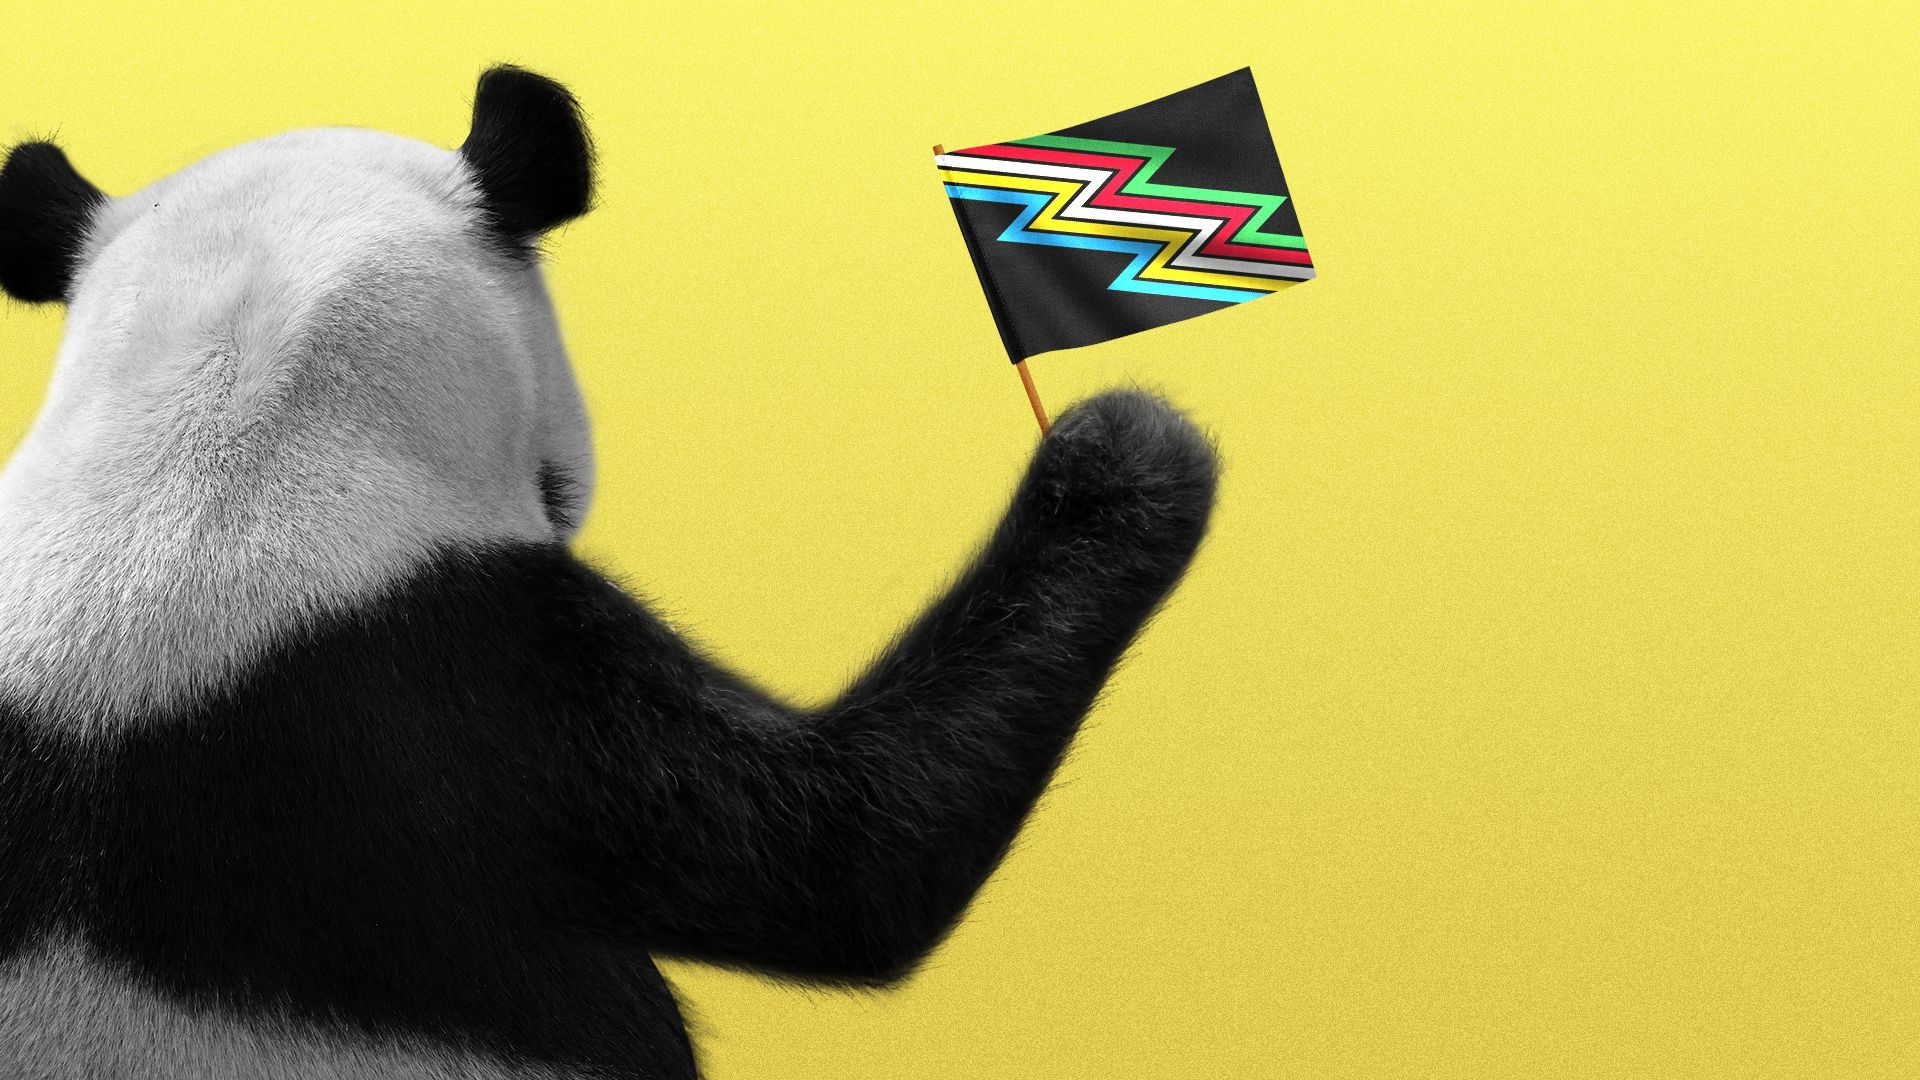 Illustration of a panda holding the disability pride flag.